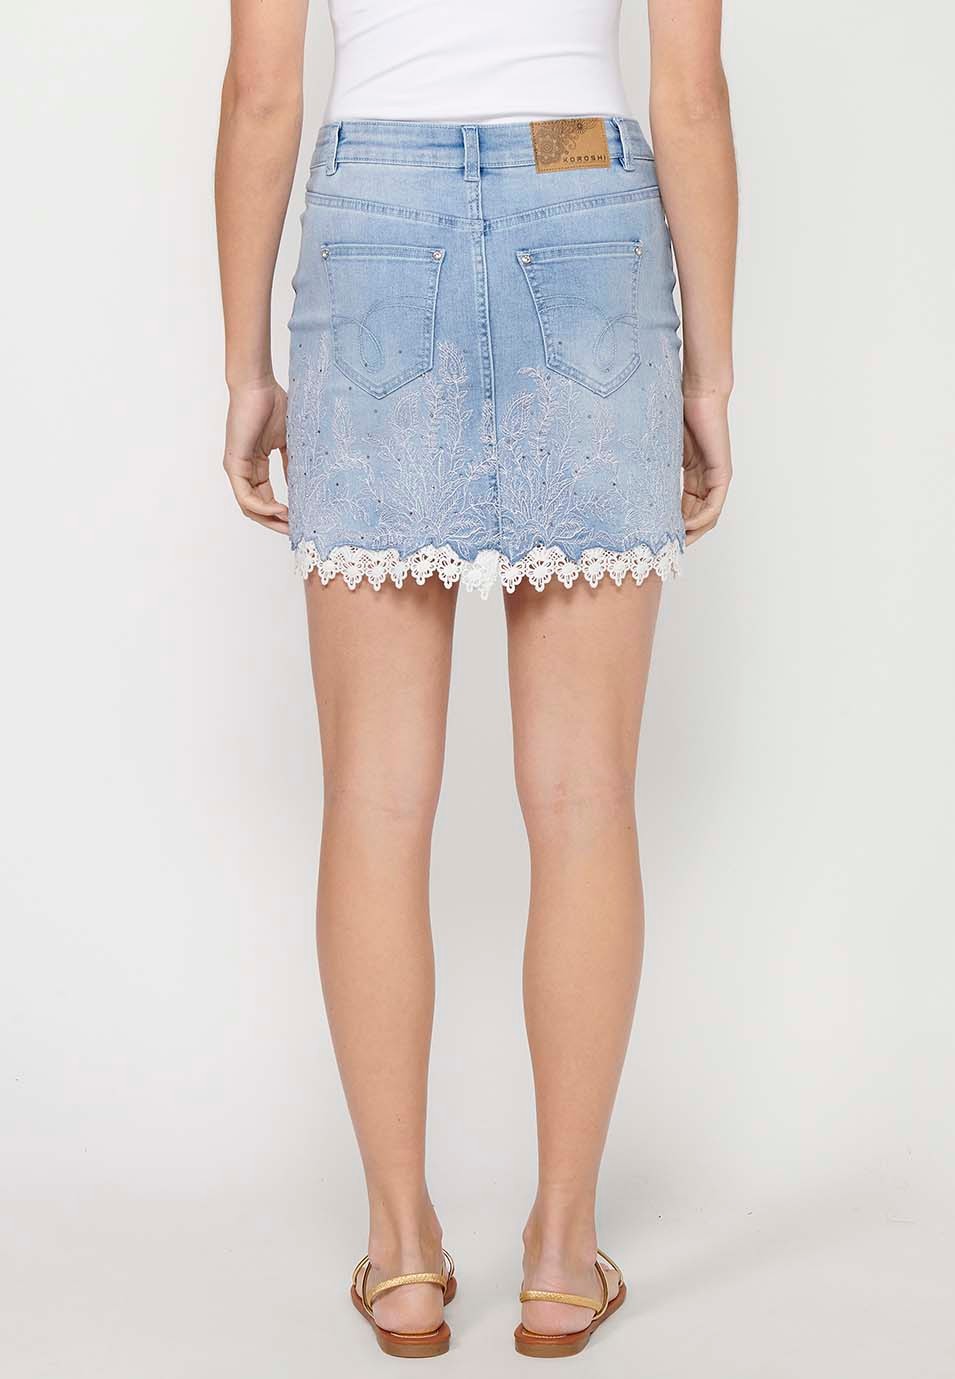 Short denim skirt finished with lace and contrasting floral embroidery with front closure with zipper and button in Blue for Women 1